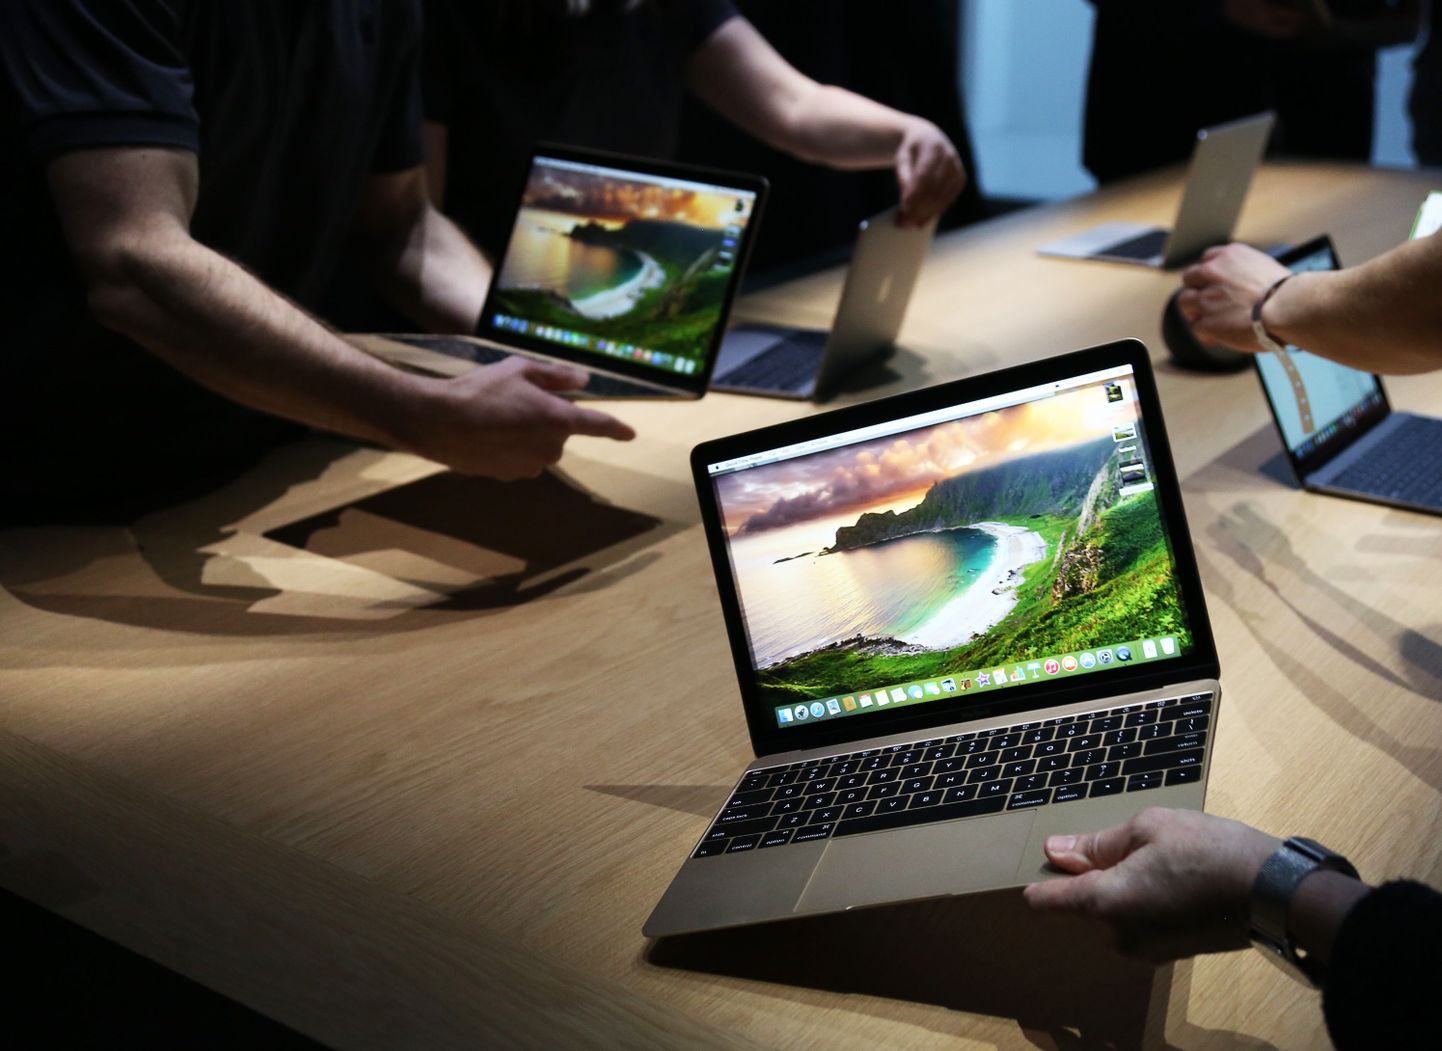 Apple's new MacBooks are displayed following an Apple event in San Francisco, California March 9, 2015.   REUTERS/Robert Galbraith (UNITED STATES  - Tags: SCIENCE TECHNOLOGY BUSINESS)